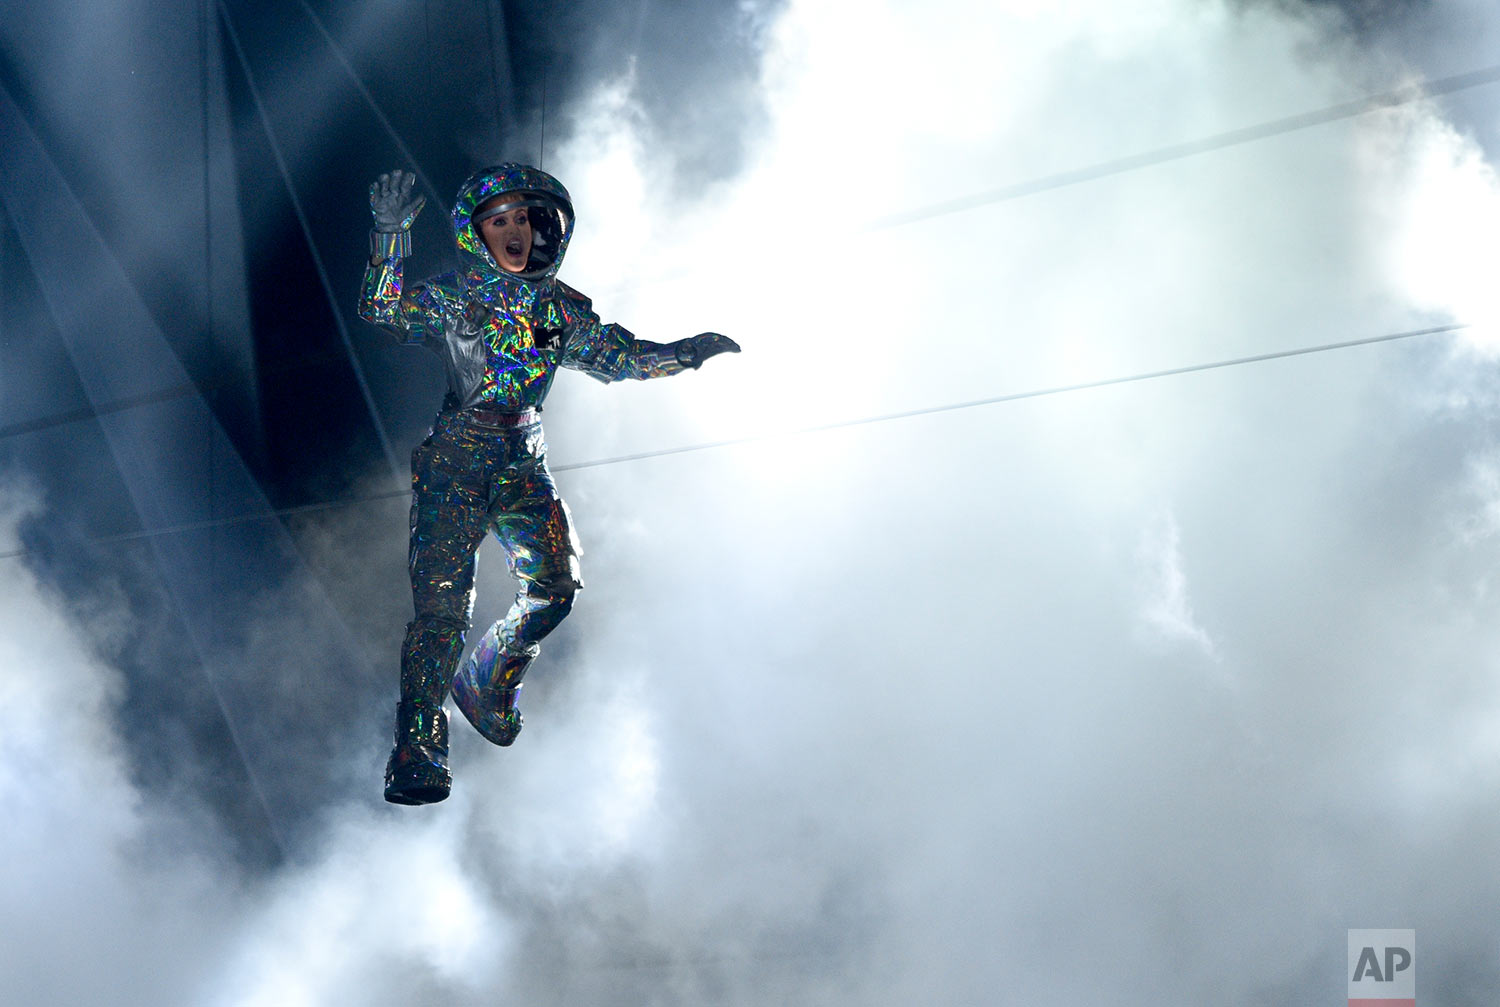  Host Katy Perry is lowered onto the stage at the MTV Video Music Awards at The Forum on Sunday, Aug. 27, 2017, in Inglewood, Calif. (Photo by Chris Pizzello/Invision/AP) 